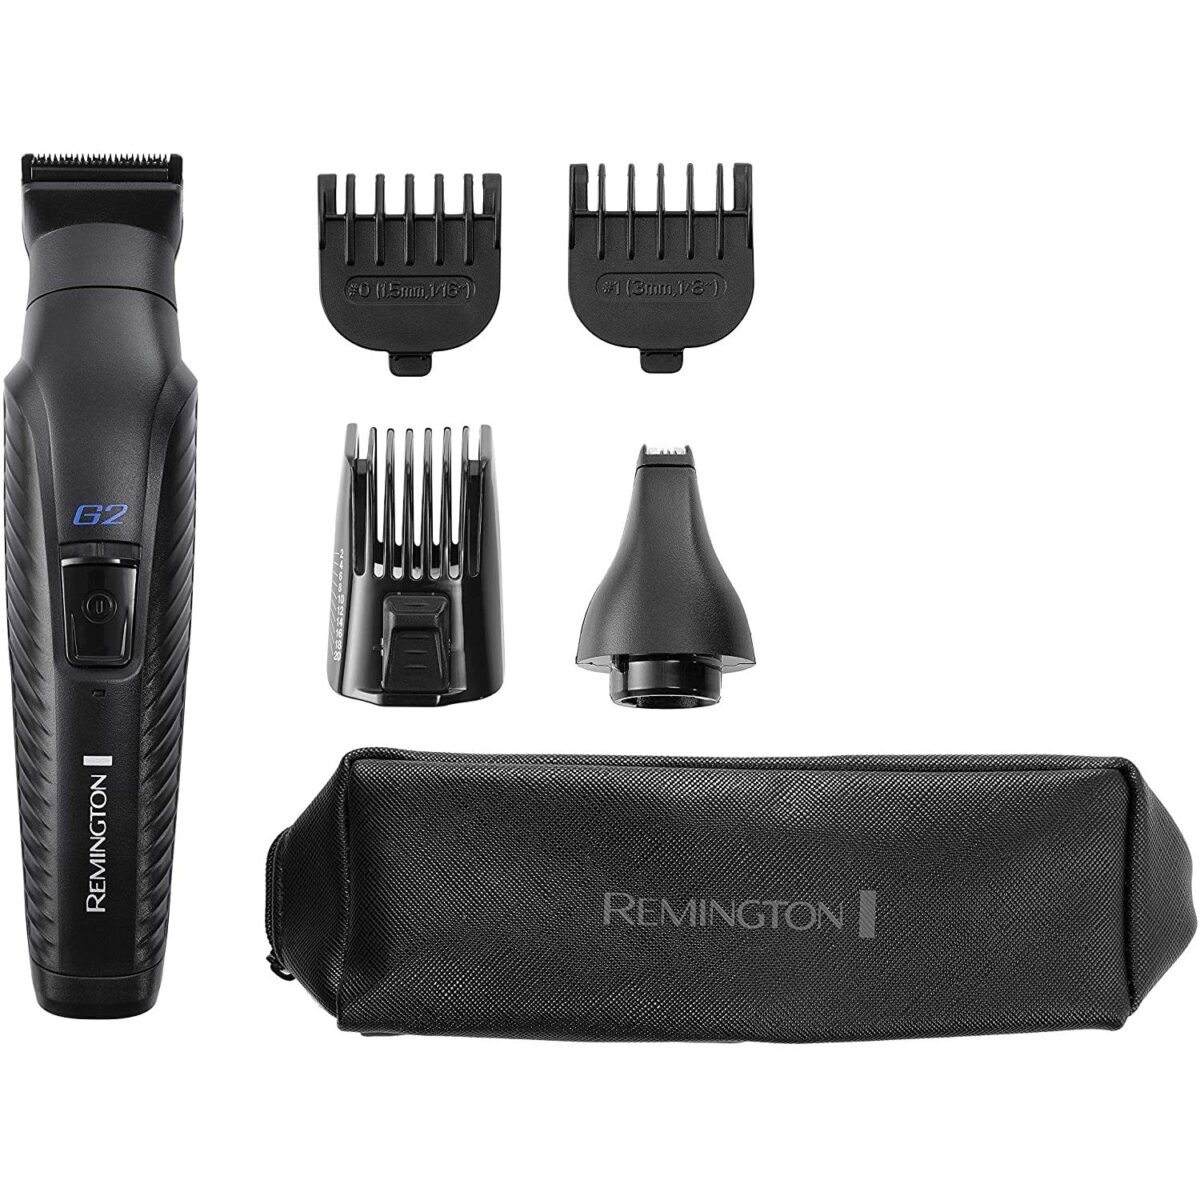 Remington – G2 Graphite Series Multi-Grooming Styles Hair Trimmer, Clipper, Nose with 5+ Attachments – Model: PG2000